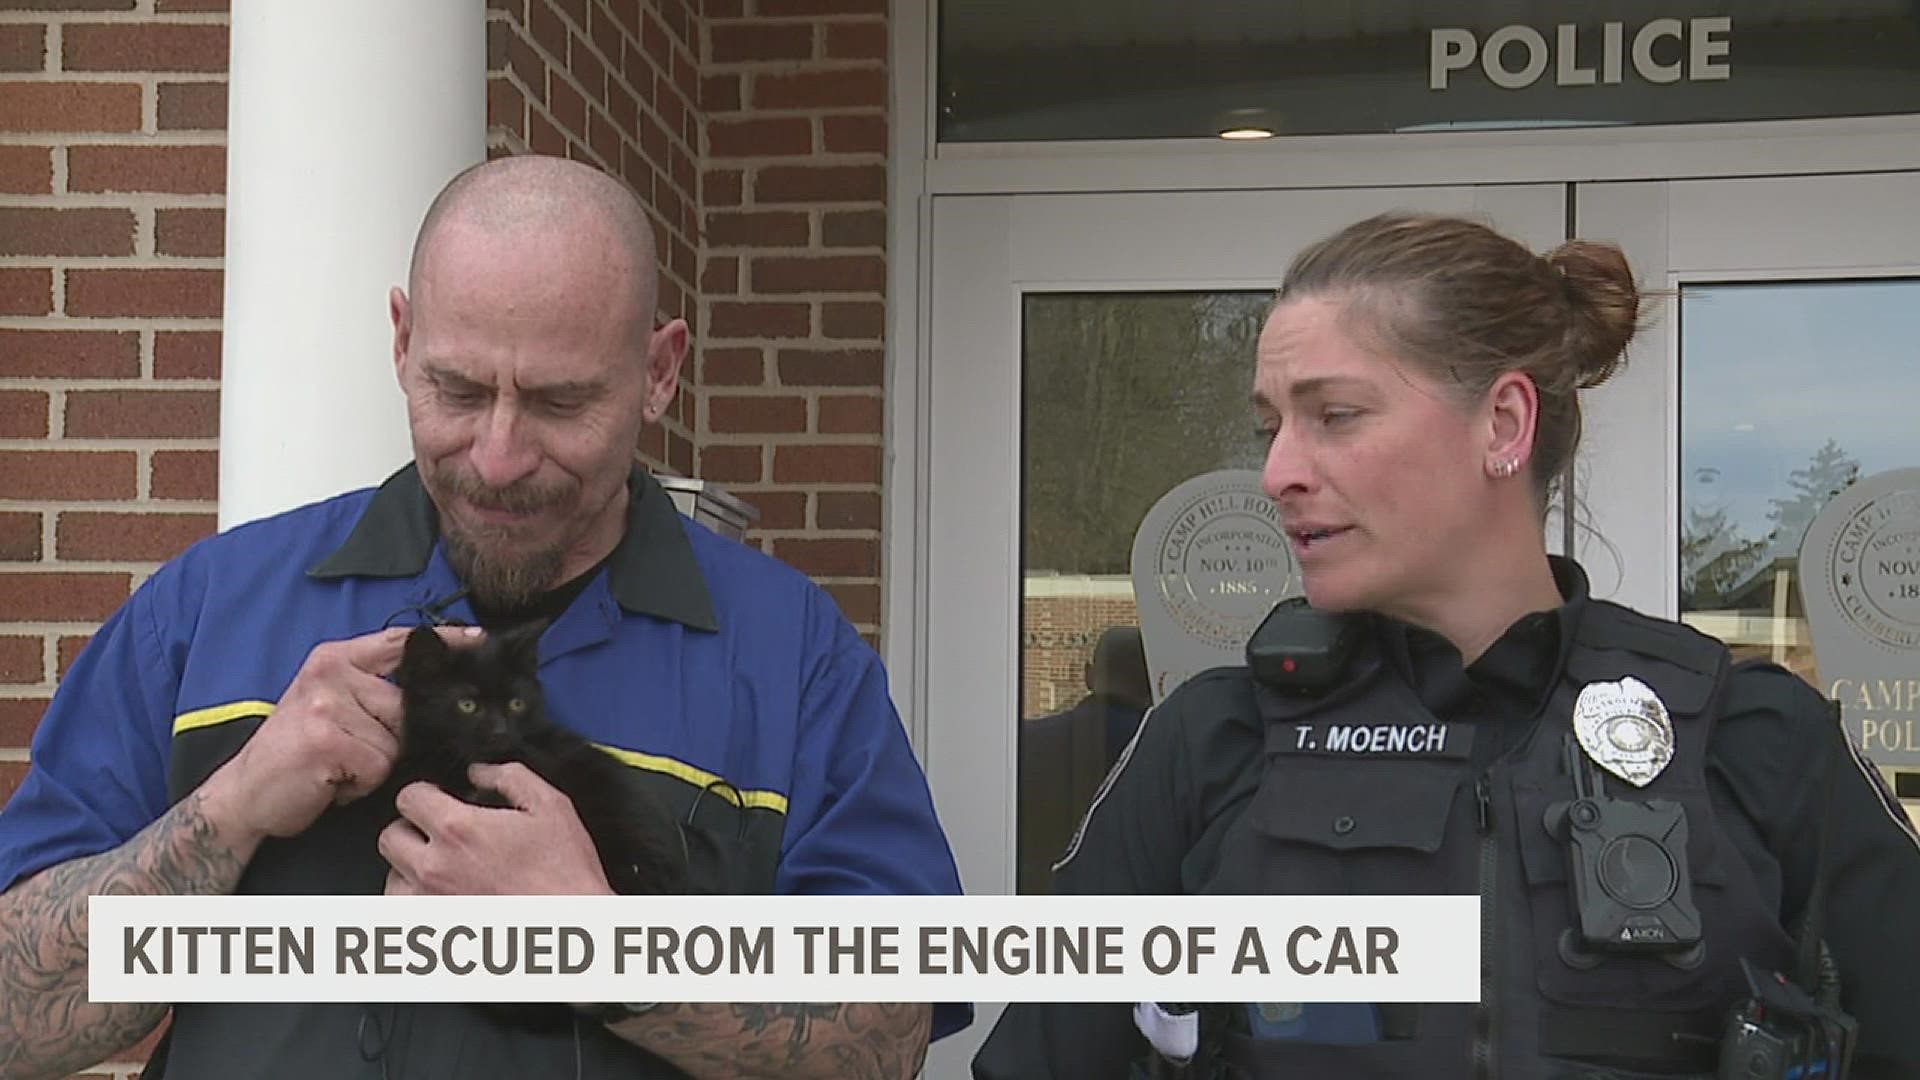 It all started when the owner of the car heard meowing coming from the front of her vehicle.